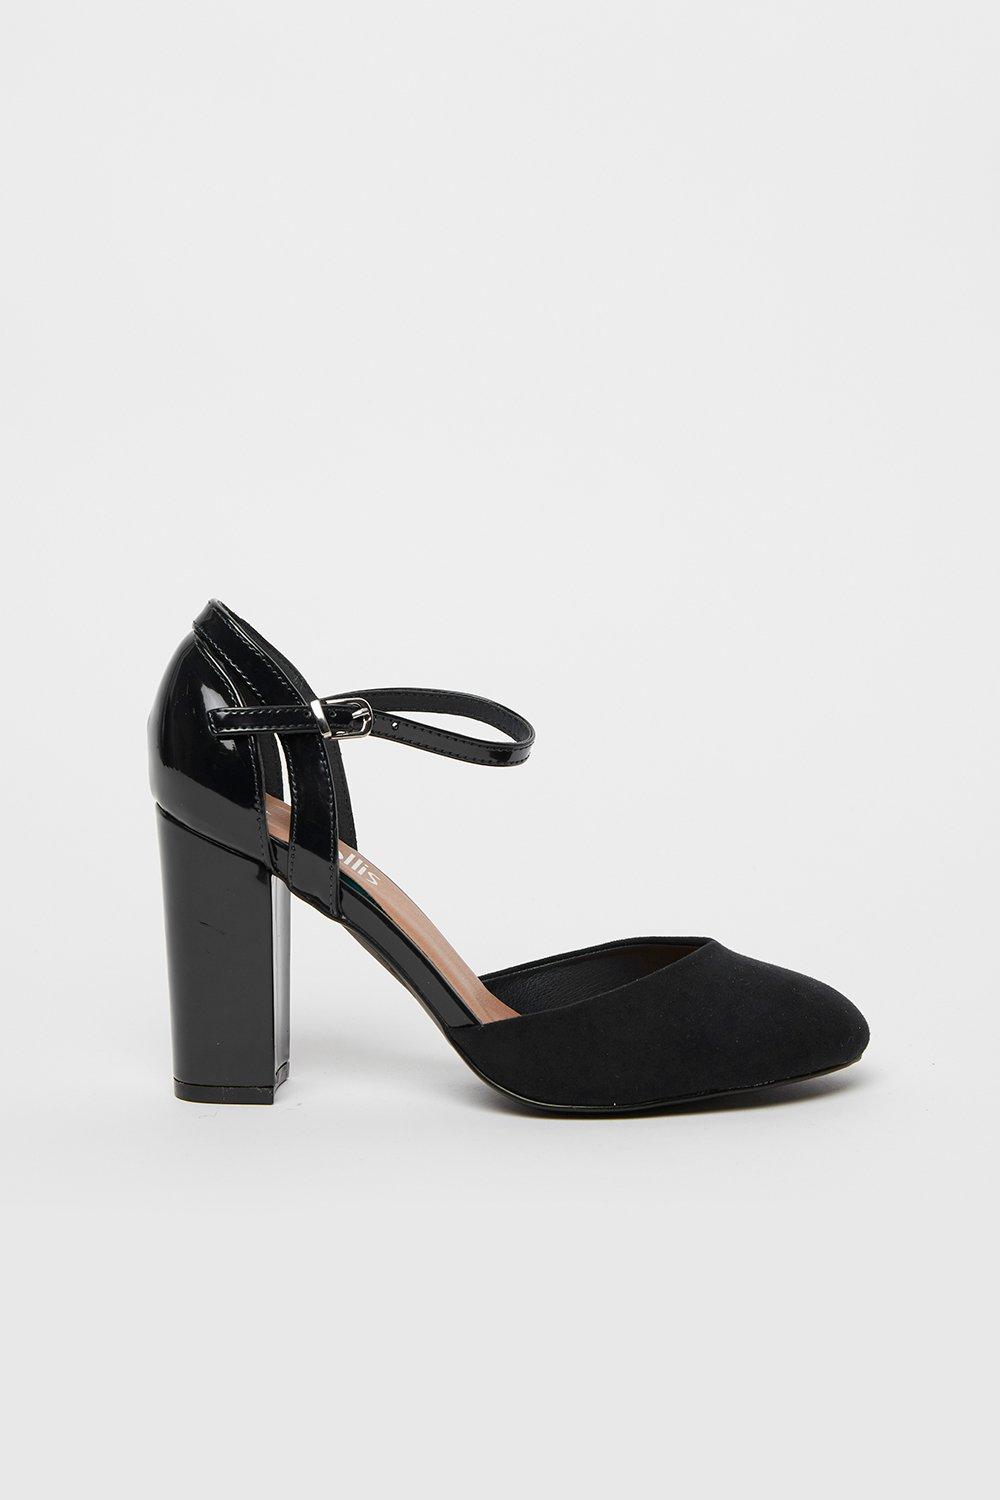 Refresh Your Wardrobe Staples With These Classic Black Sophisticated Shoesheels. A Round Toe, Sleek Black Hue And Ankle Strap Bring Timeless Style, Whilst Contrasting Textures Give Them A Contemporary Edge.  Heel Height: 90Mm Standard Fit Heeled Shoe